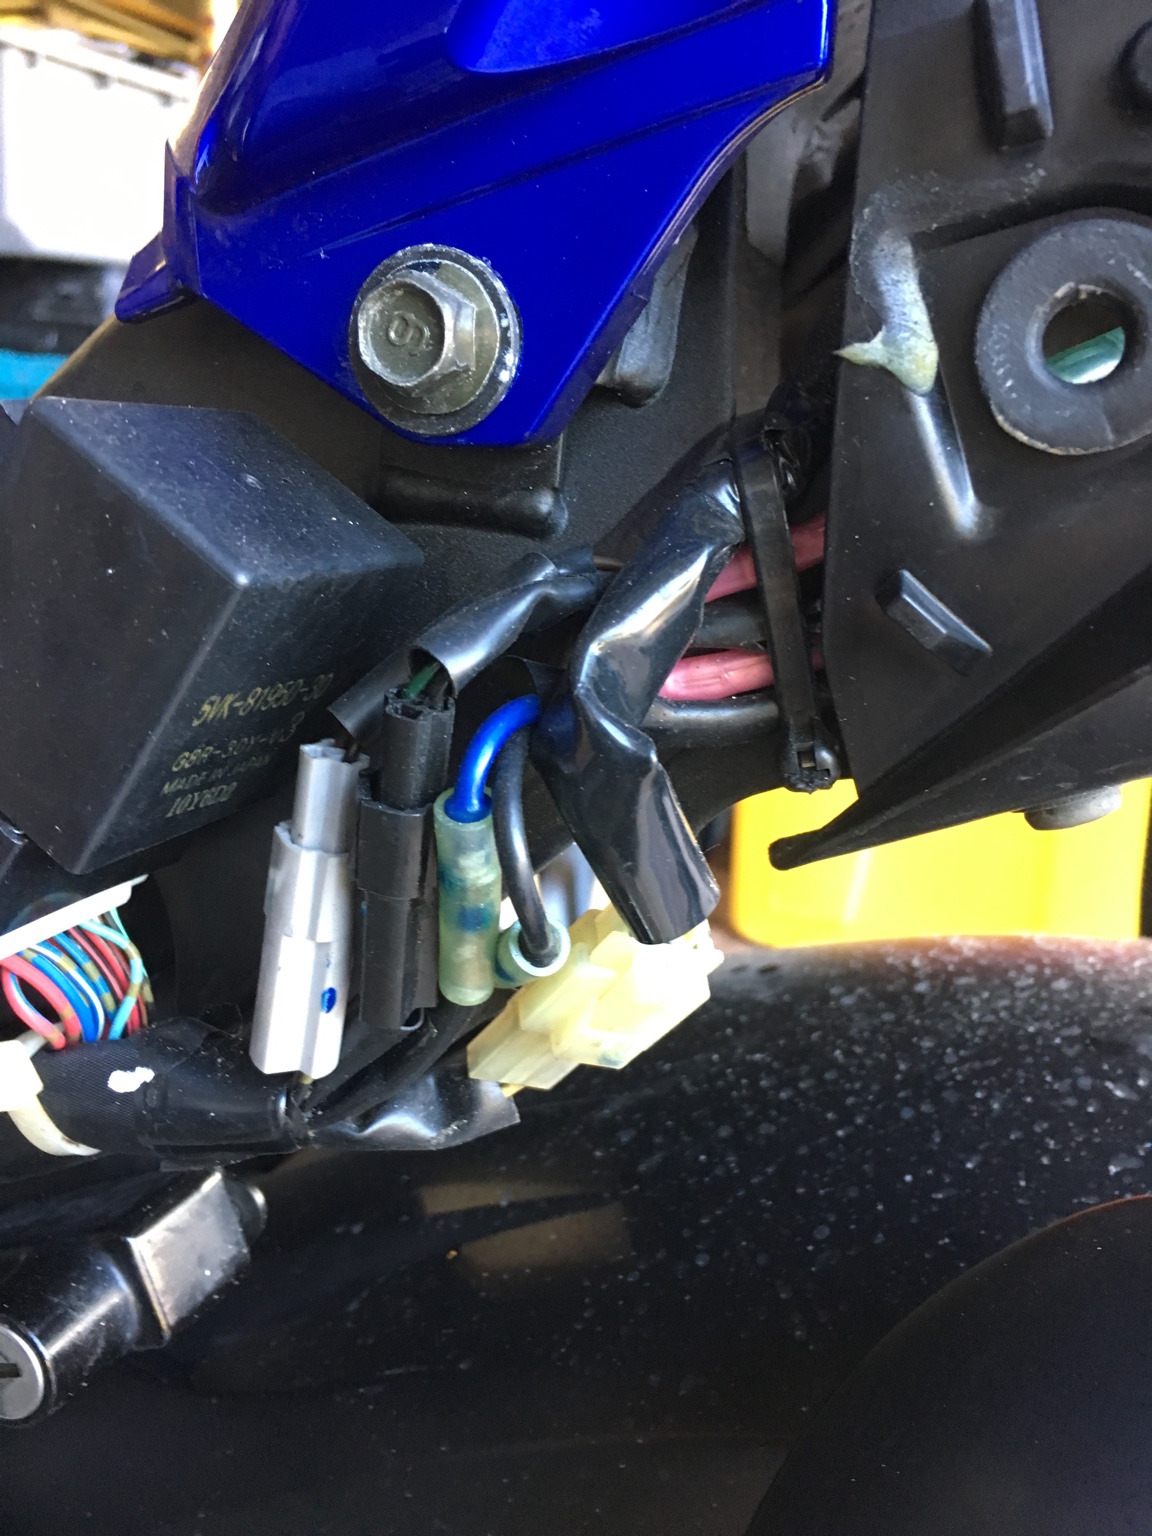 08 Yamaha Fz6 Rear Right Running Light Does Not Turn On Yet The Same Bulb Will Turn On For The Tu Yamaha Fz6 Forums Fz6 Motorcycle Enthusiasts Forum